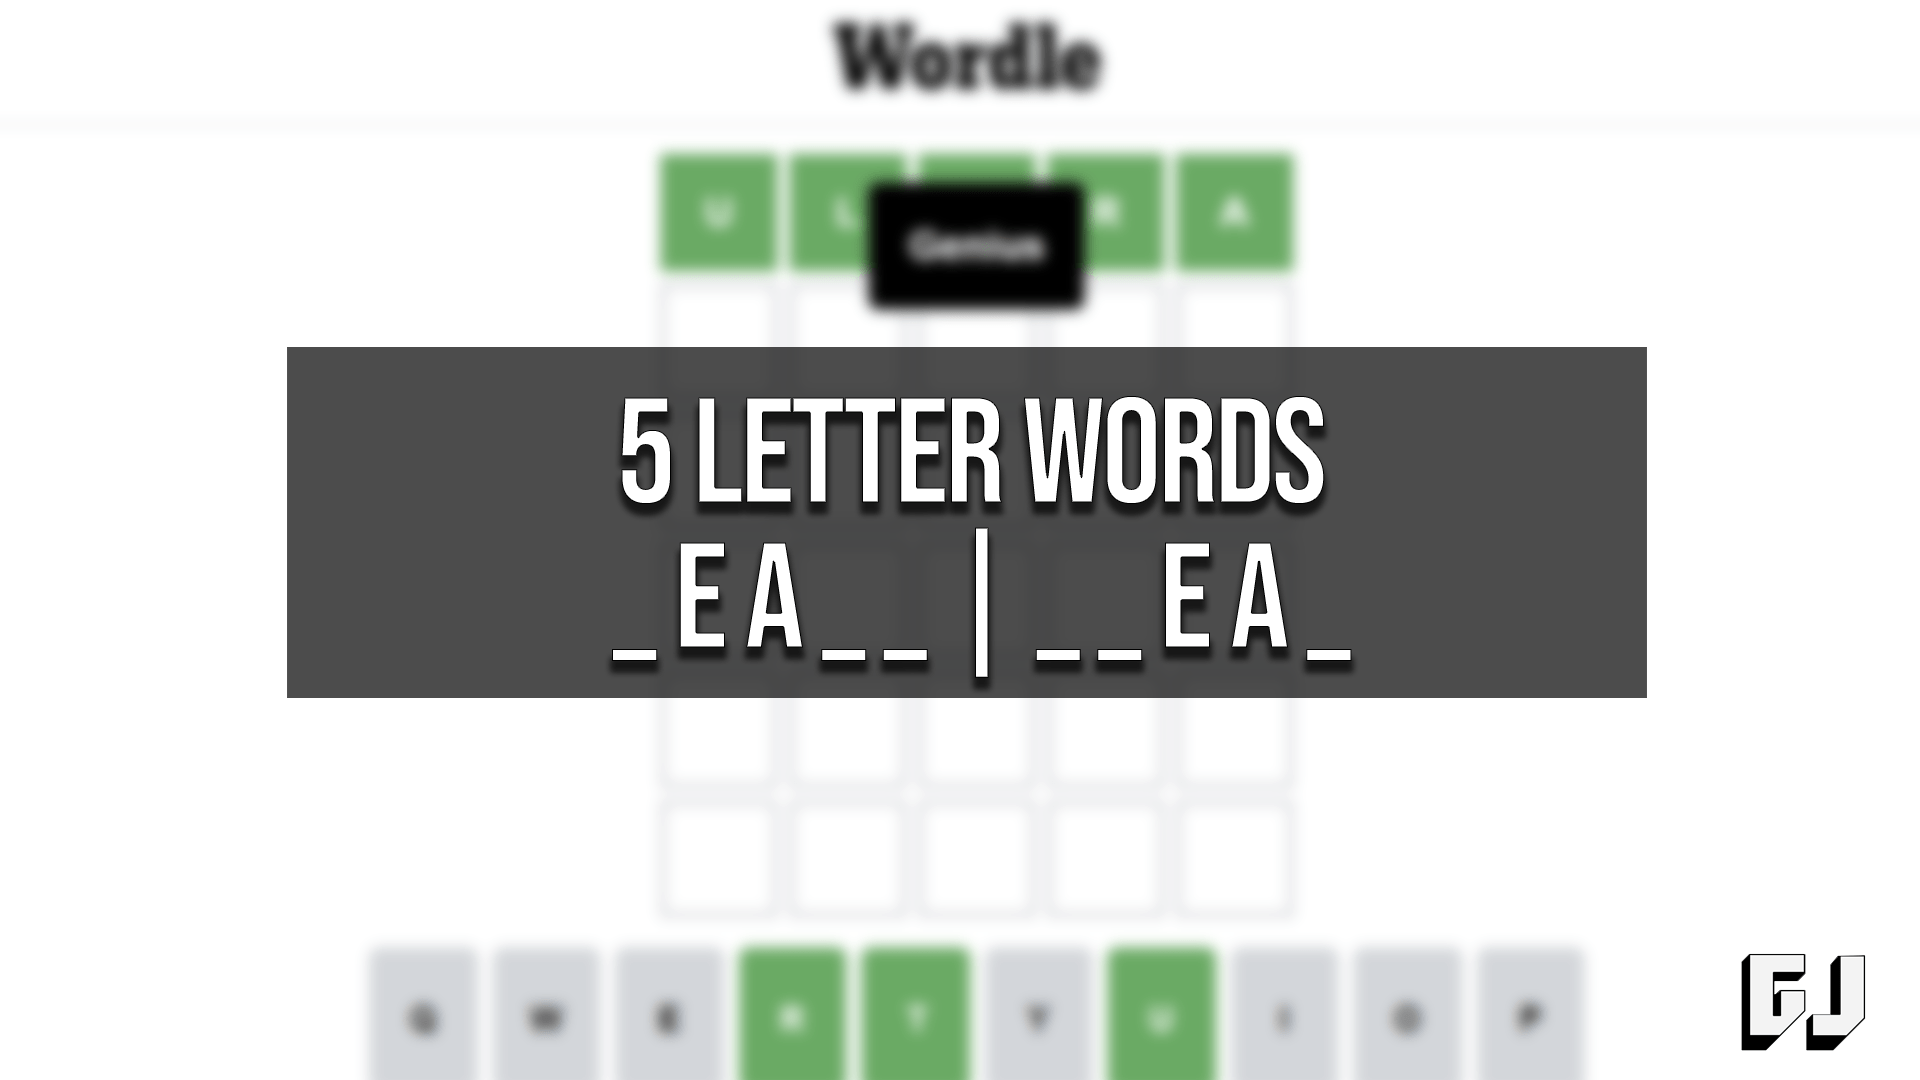 5 letter words containing ea